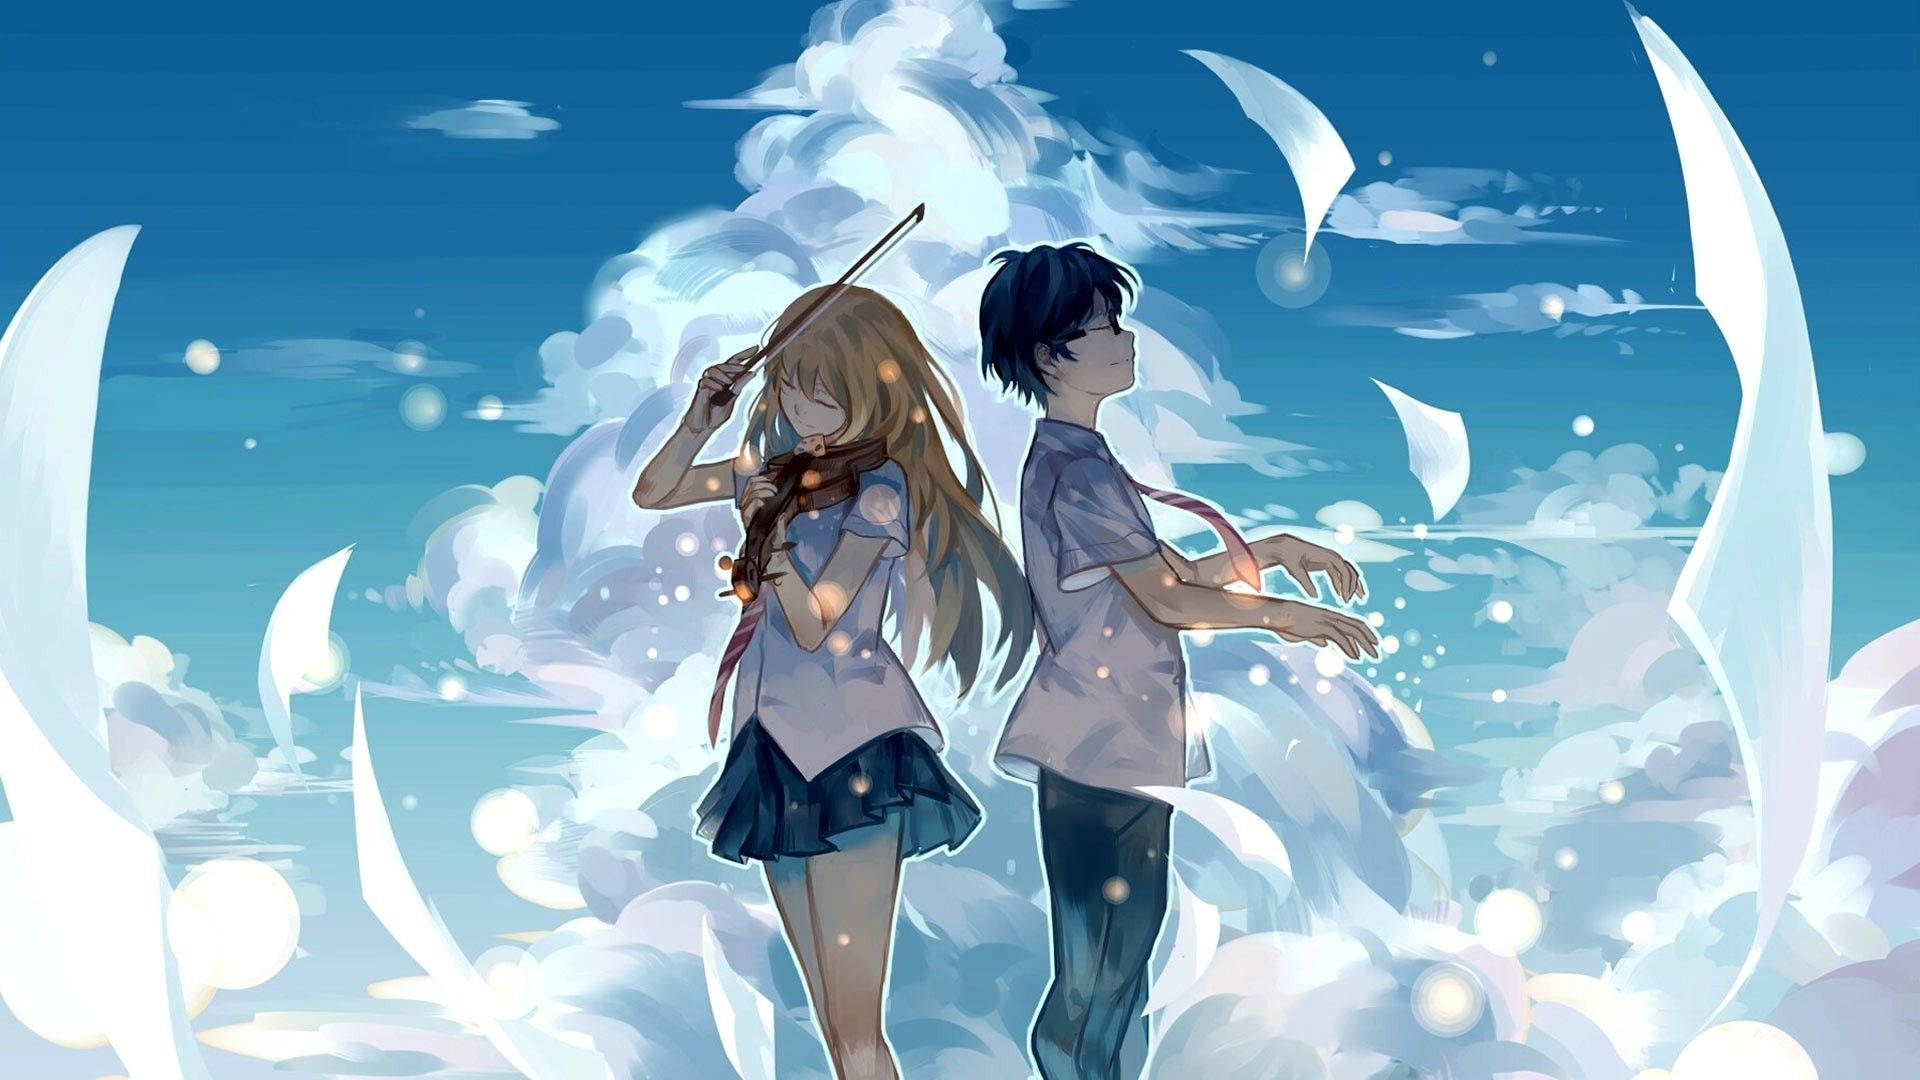 Your Lie In April Anime Aesthetic Wallpaper